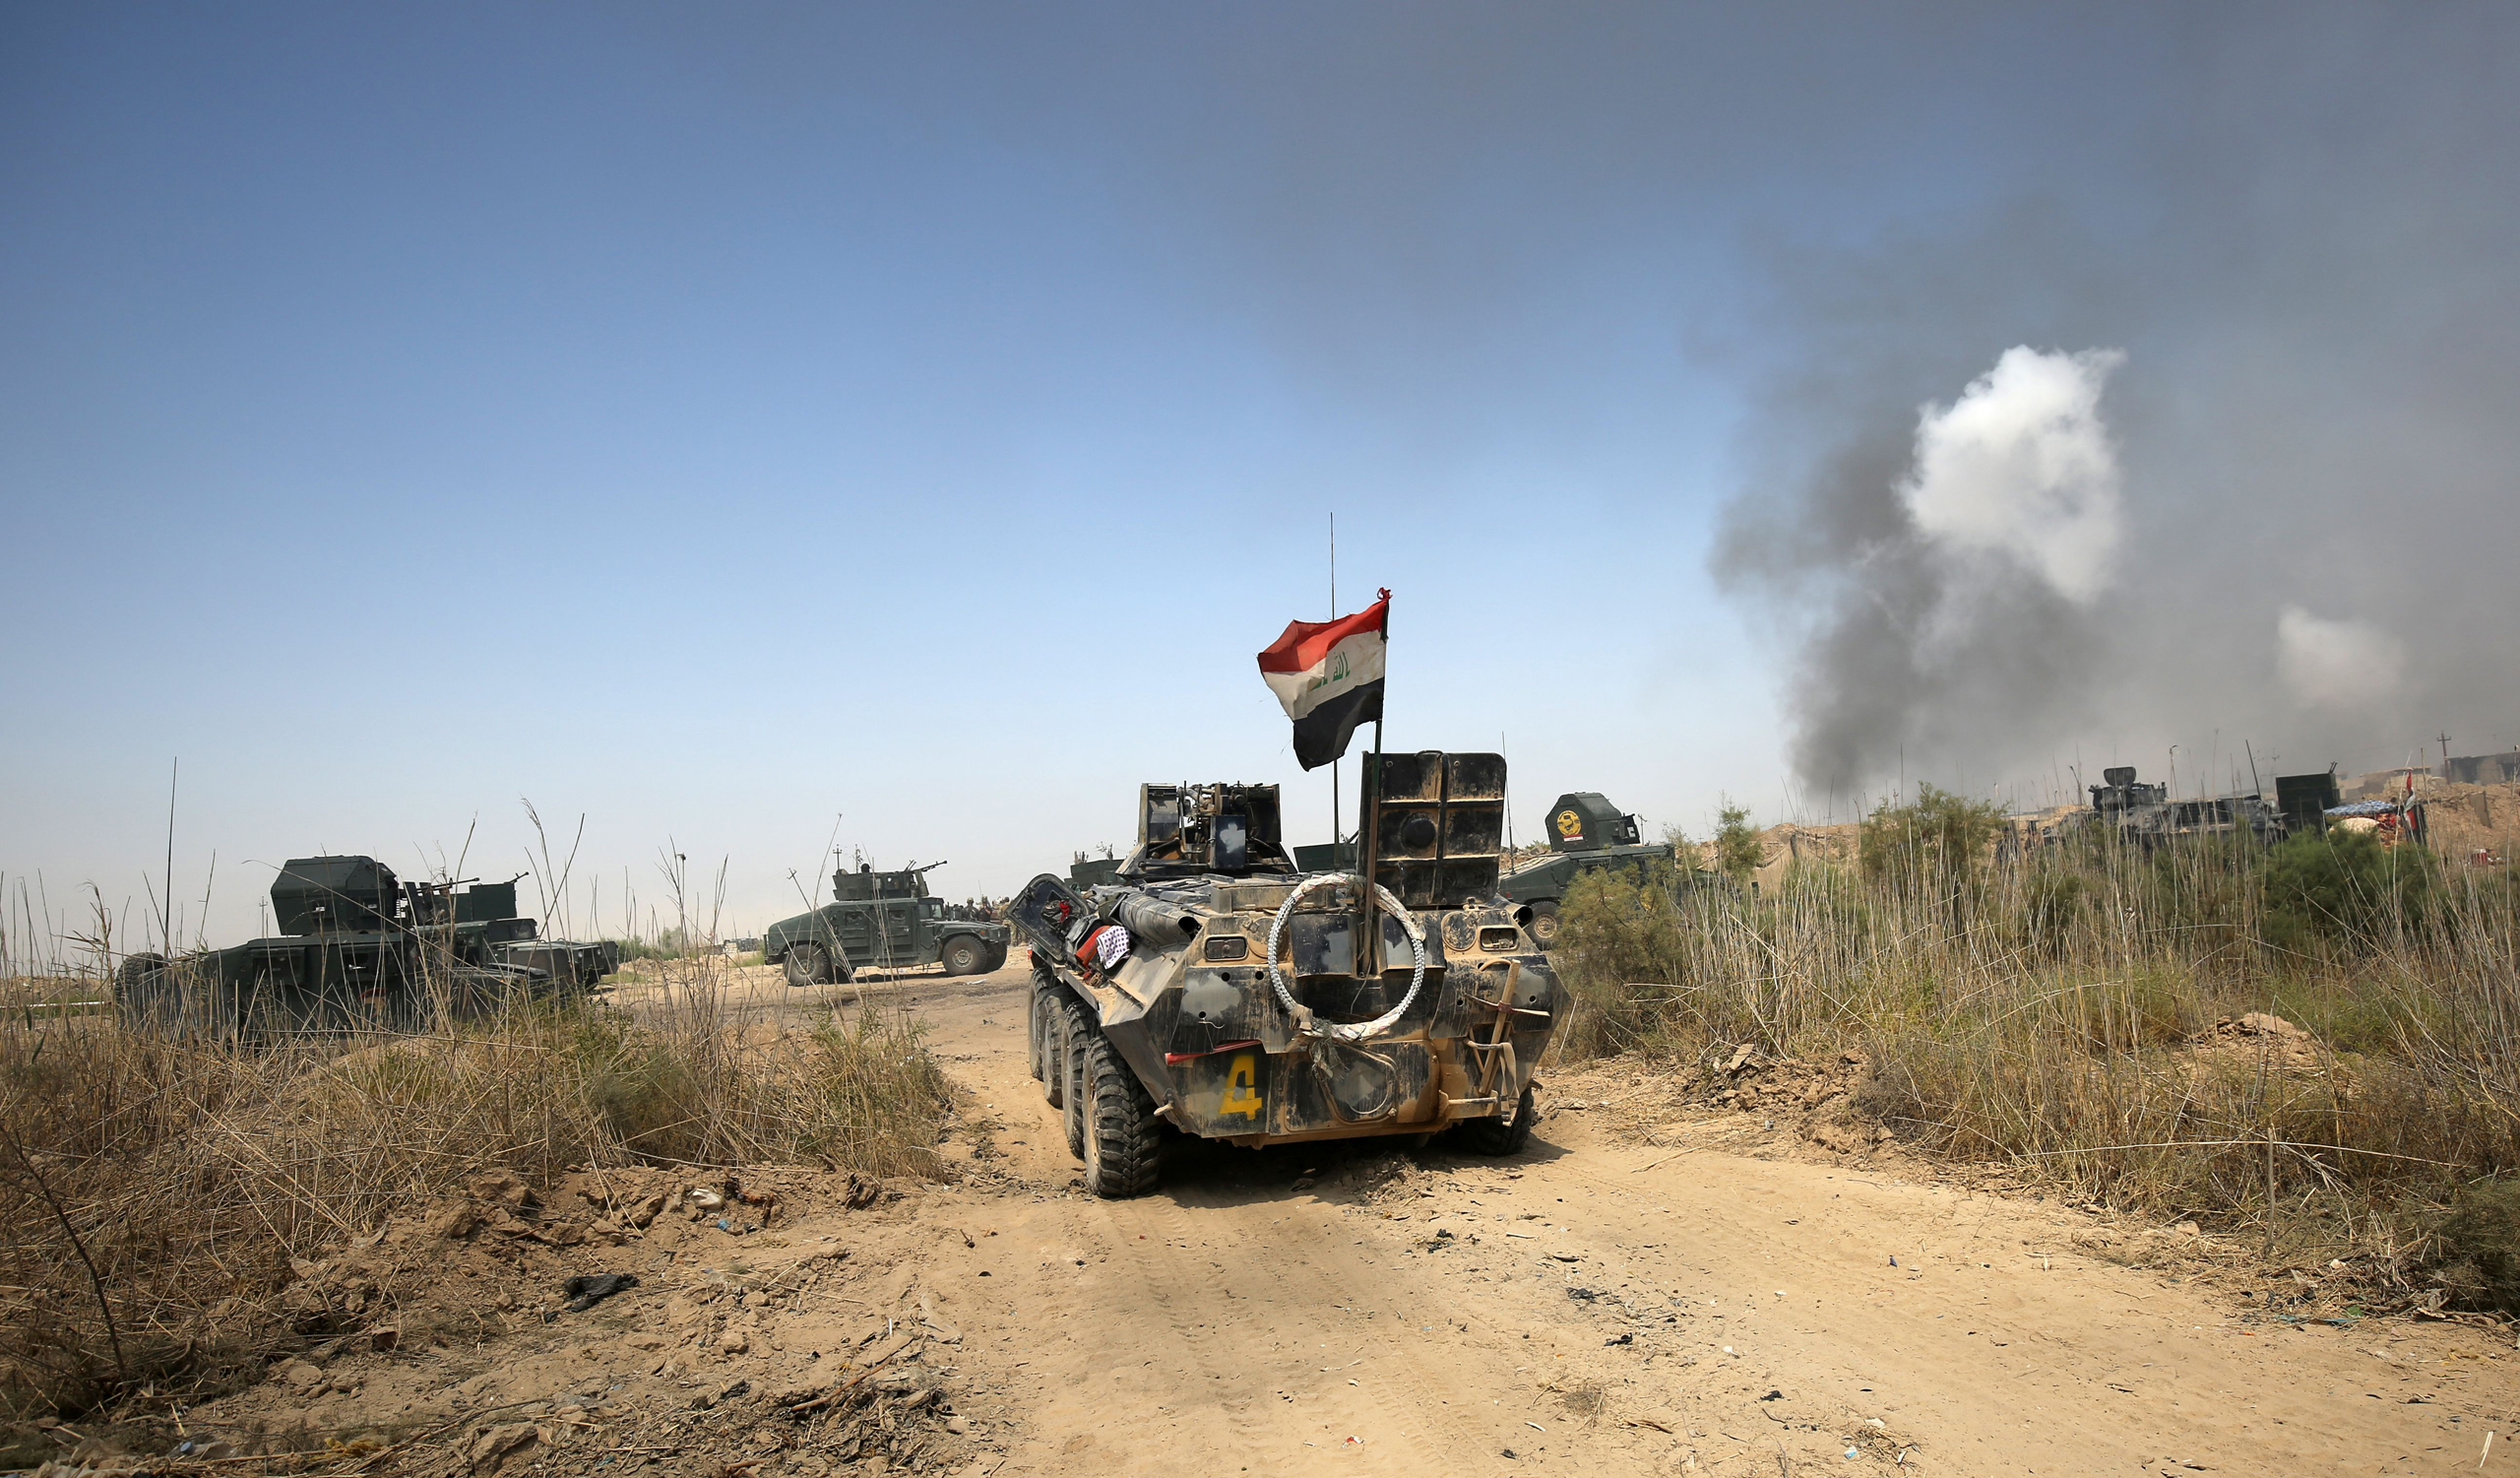 Iraqi government forces drive their armoured vehicles during an operation, backed by air support from the US-led coalition, in Fallujah's southern Shuhada neighbourhood to retake the area from the Islamic State (IS) group on June 15, 2016. (Ahmad Al-Rubaye—AFP/Getty Images)